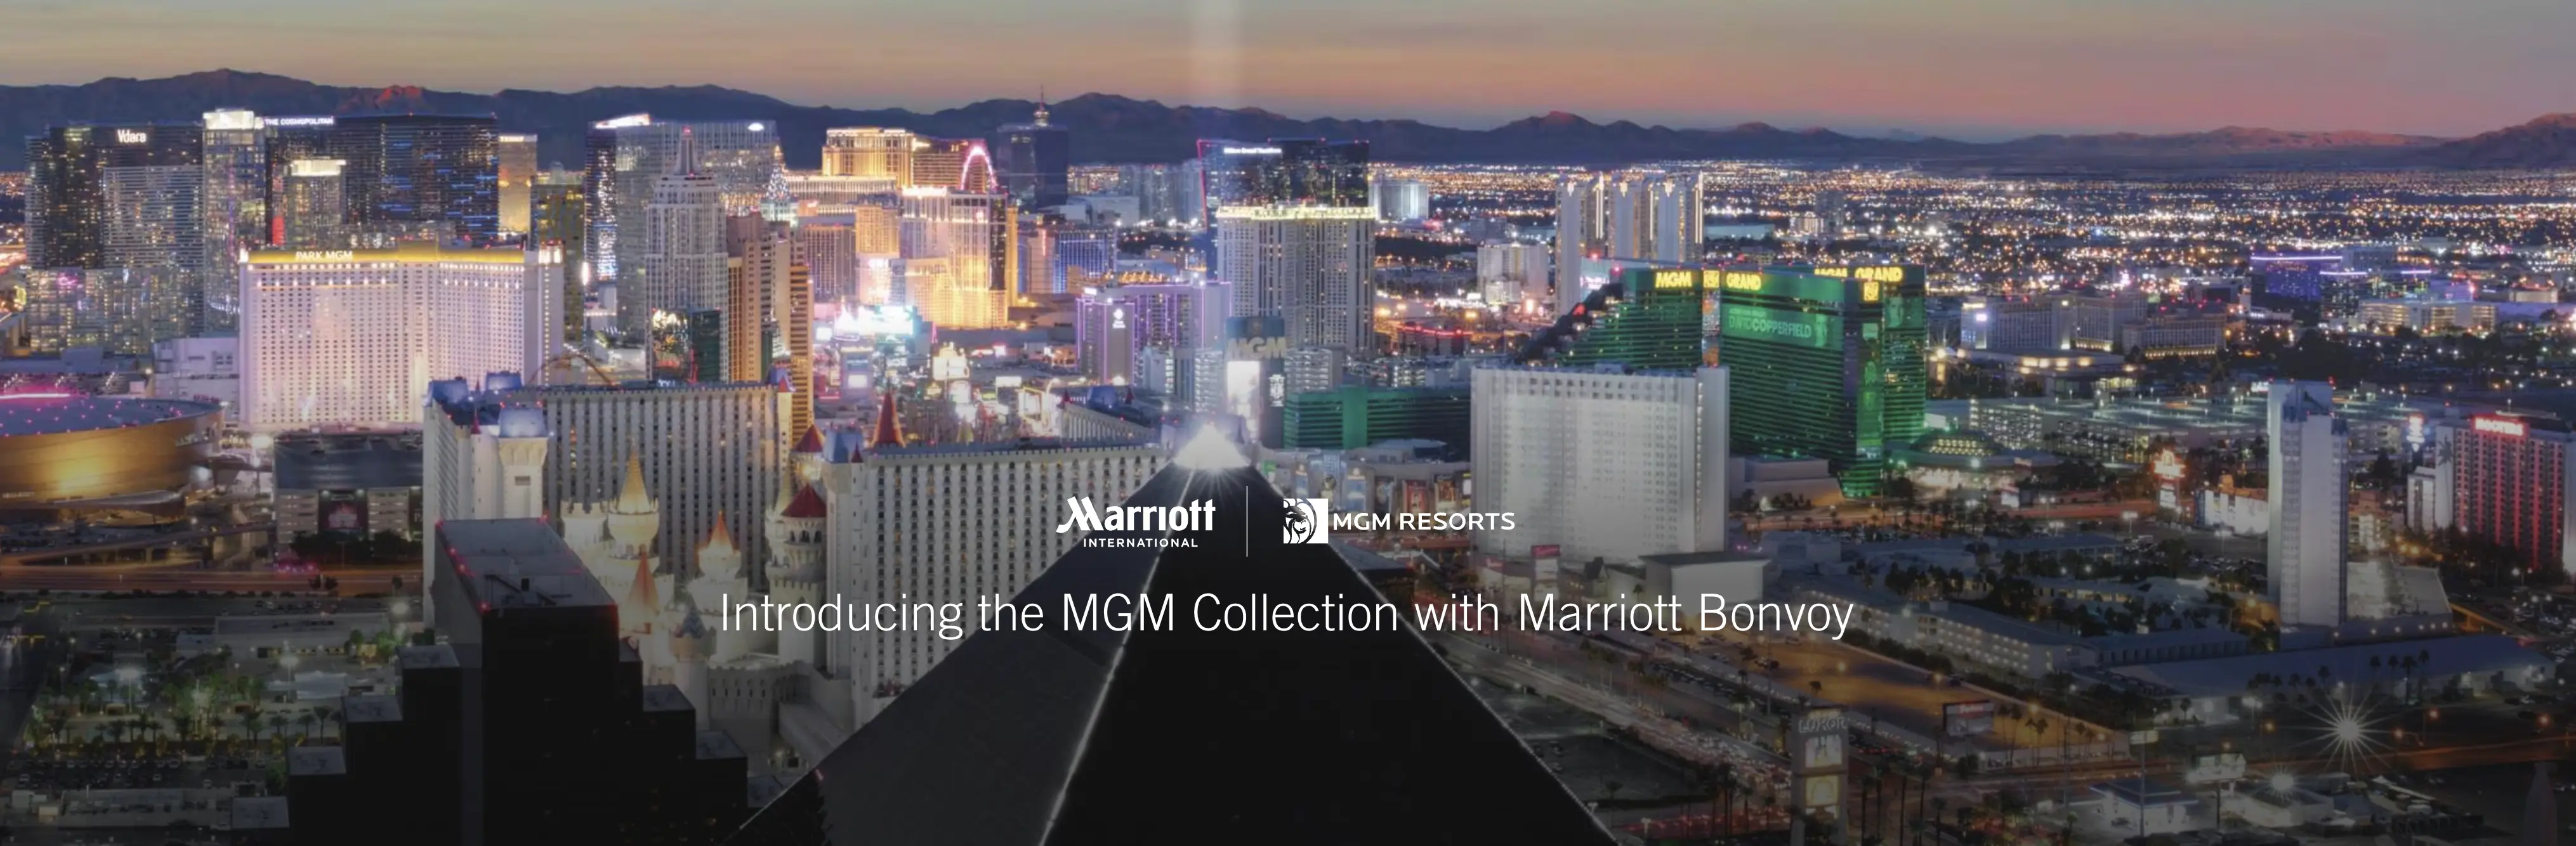 Introducing the MGM Collection with Marriott Bonvoy